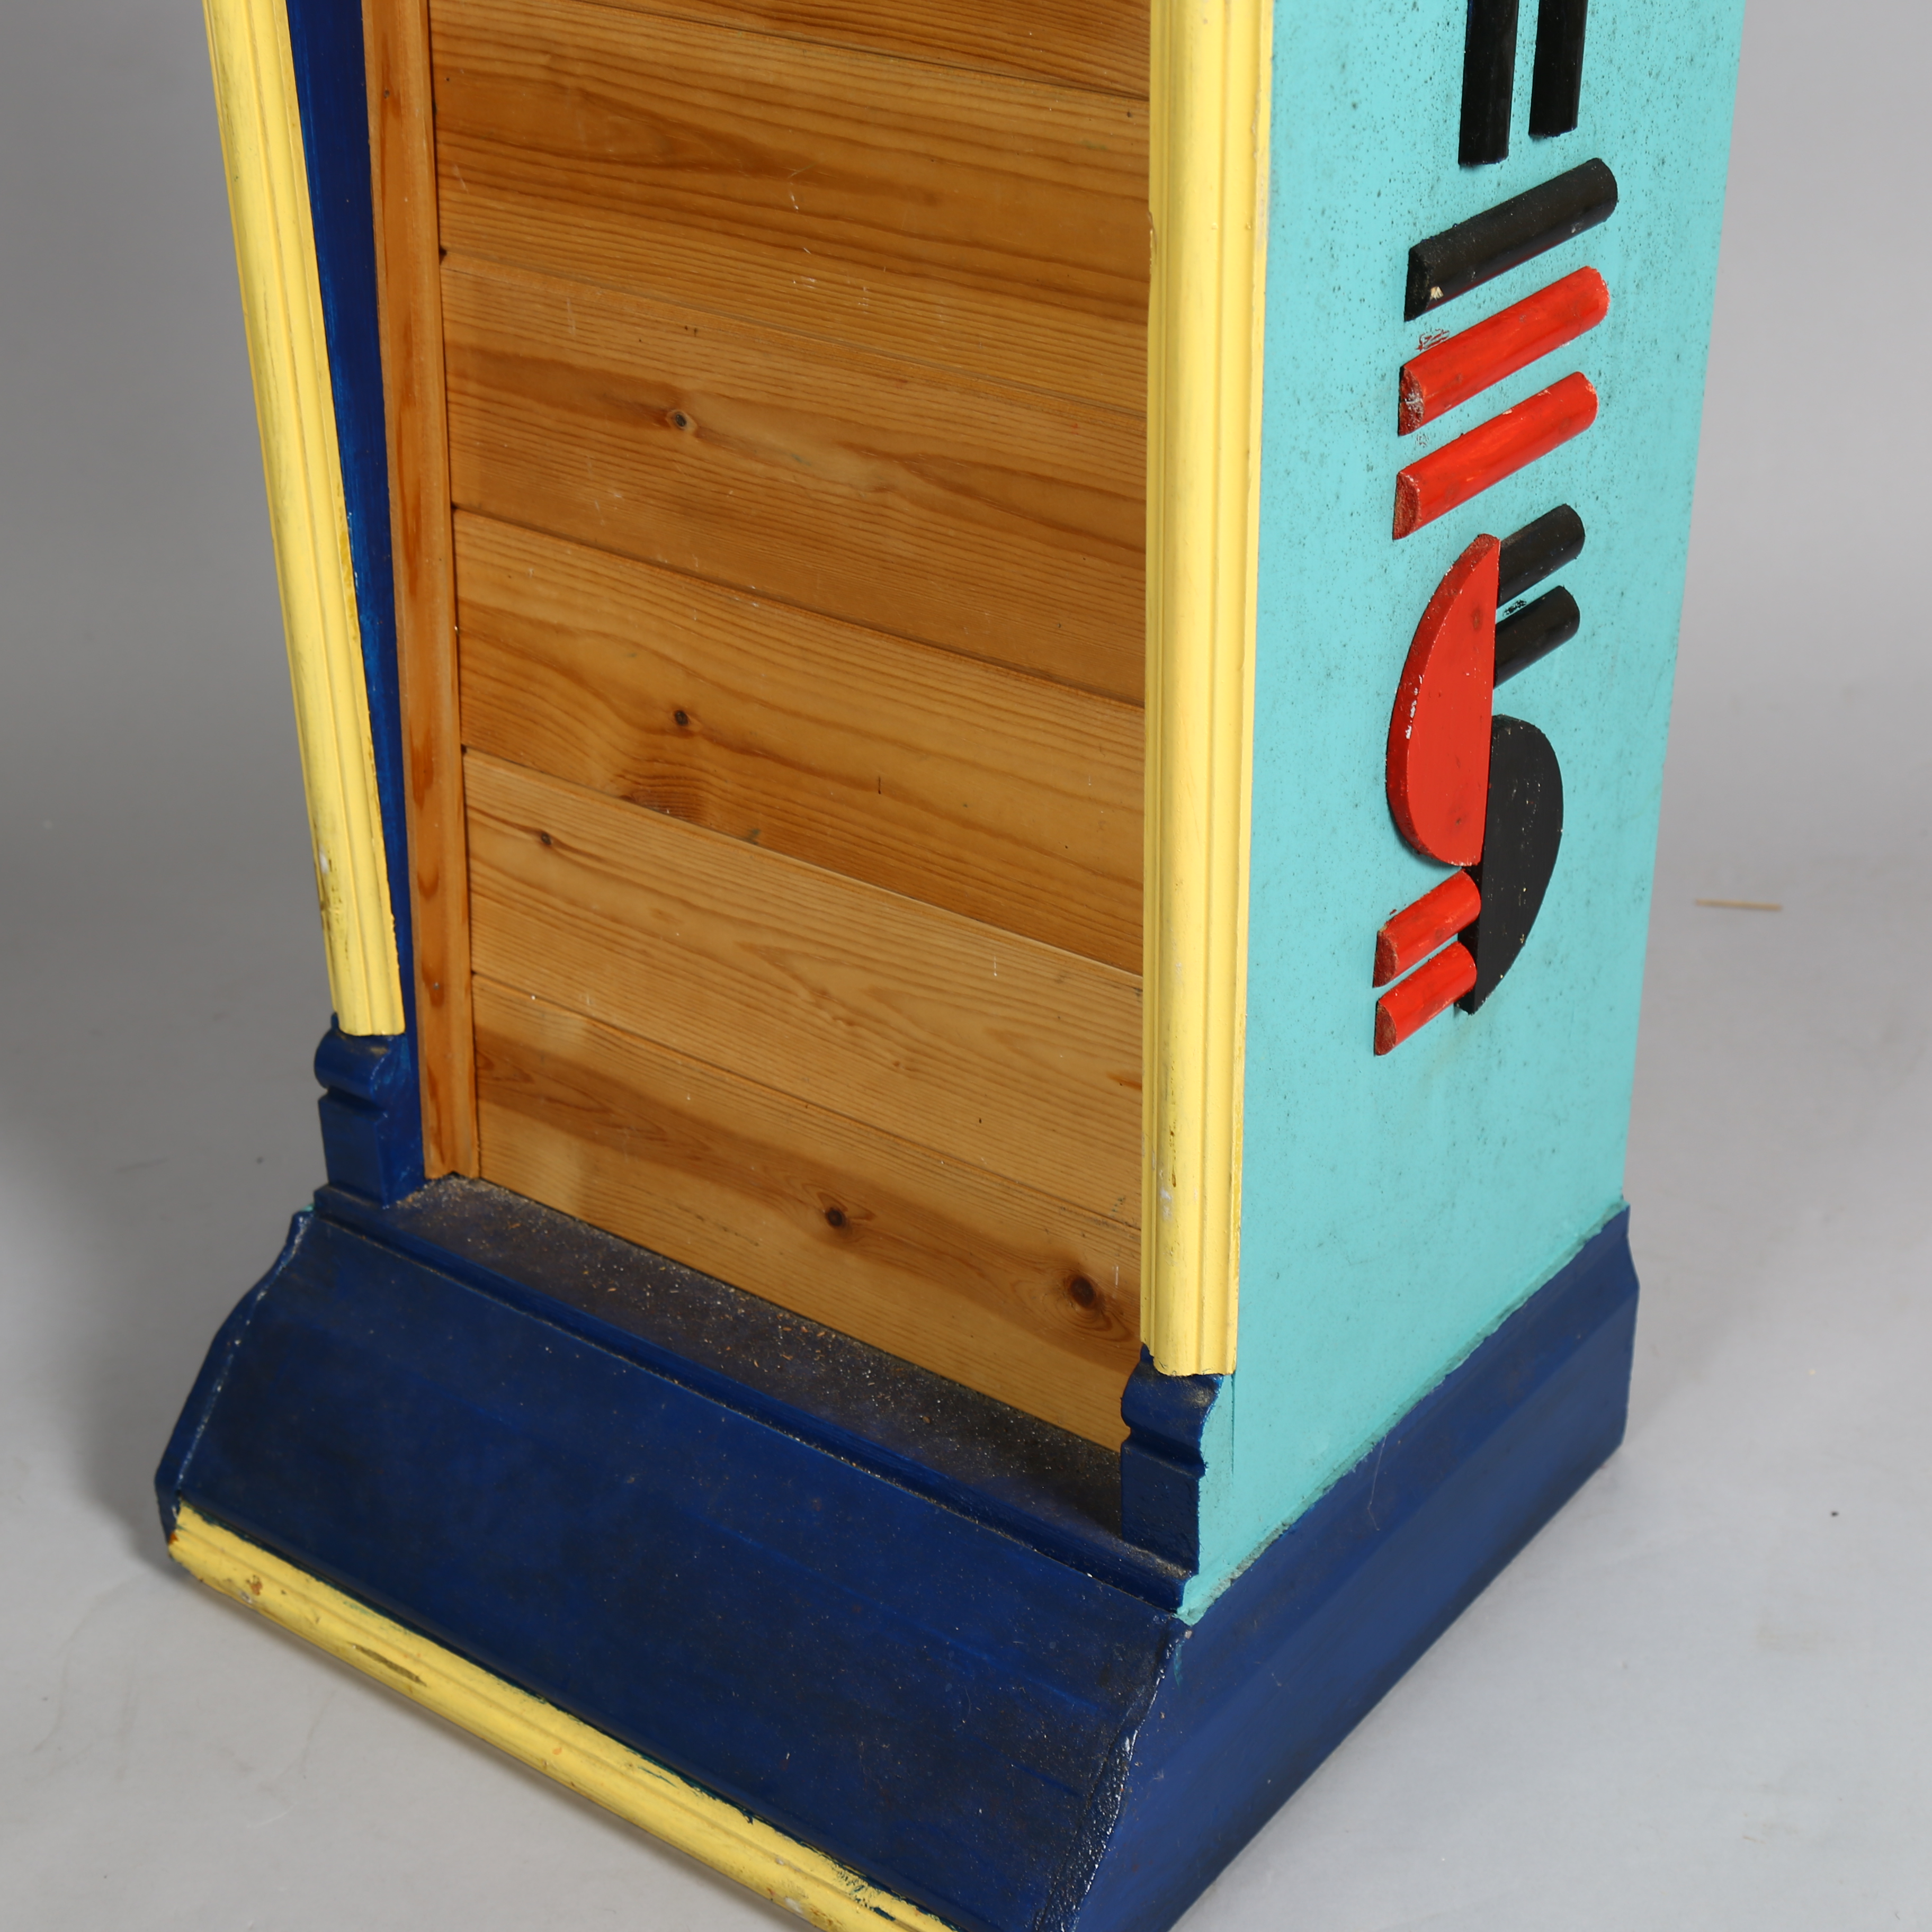 Genco (US) Hoops upright amusement arcade machine circa 1950s, operating on an old penny, painted - Bild 8 aus 8